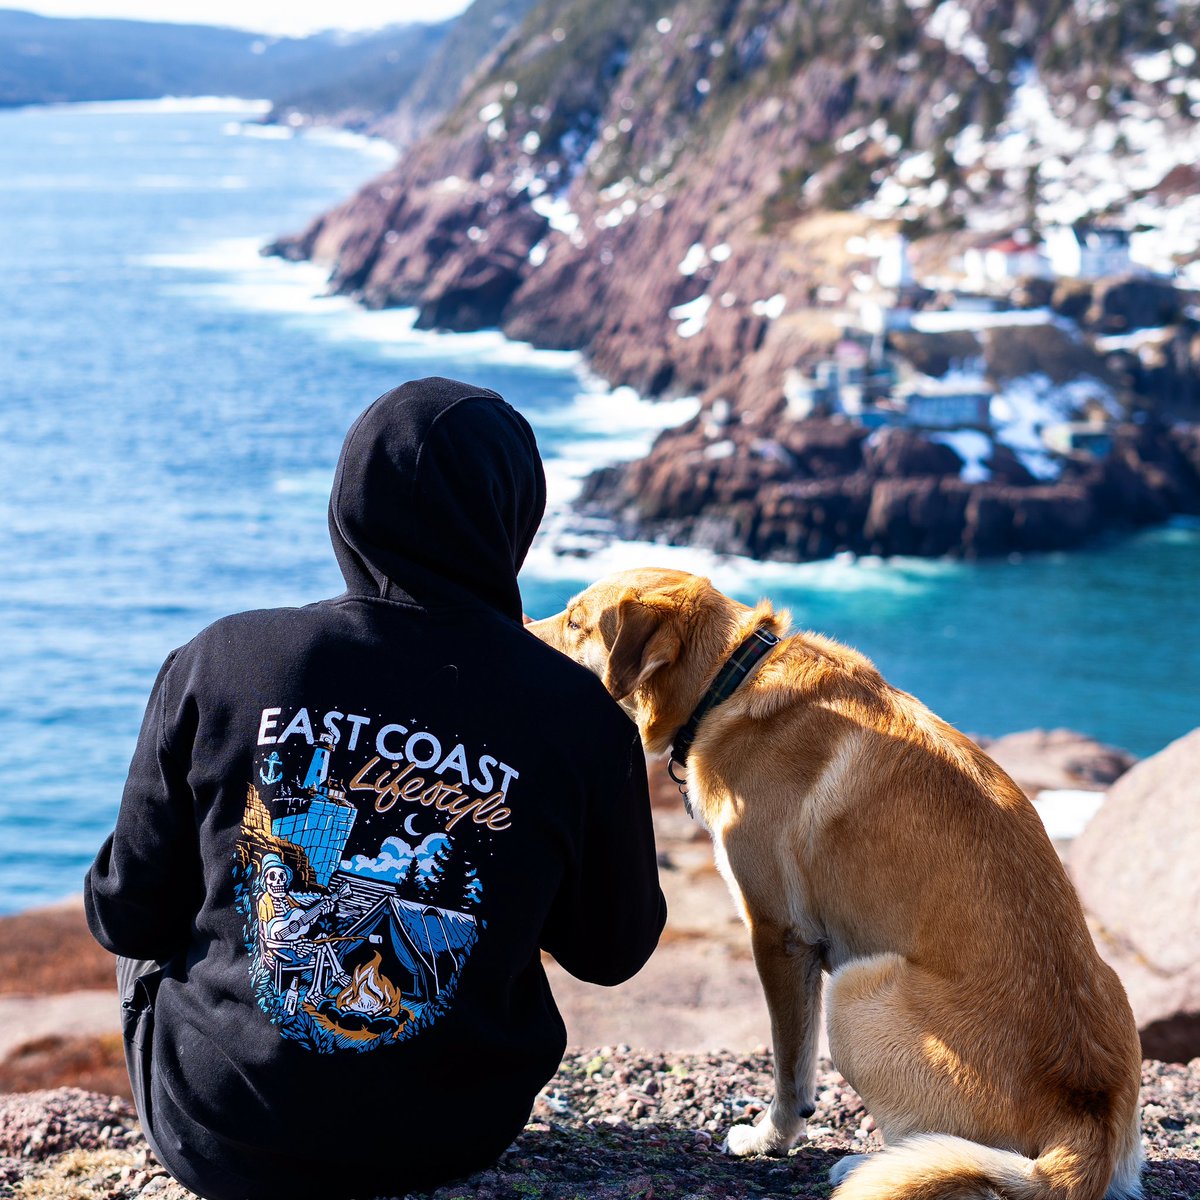 Hope you’re having a great weekend! Get out there & explore the coast 🌊 EASTCOASTLIFESTYLE.com Can you guess where this is? 🌎 #eastcoastlifestyle #explore #canada